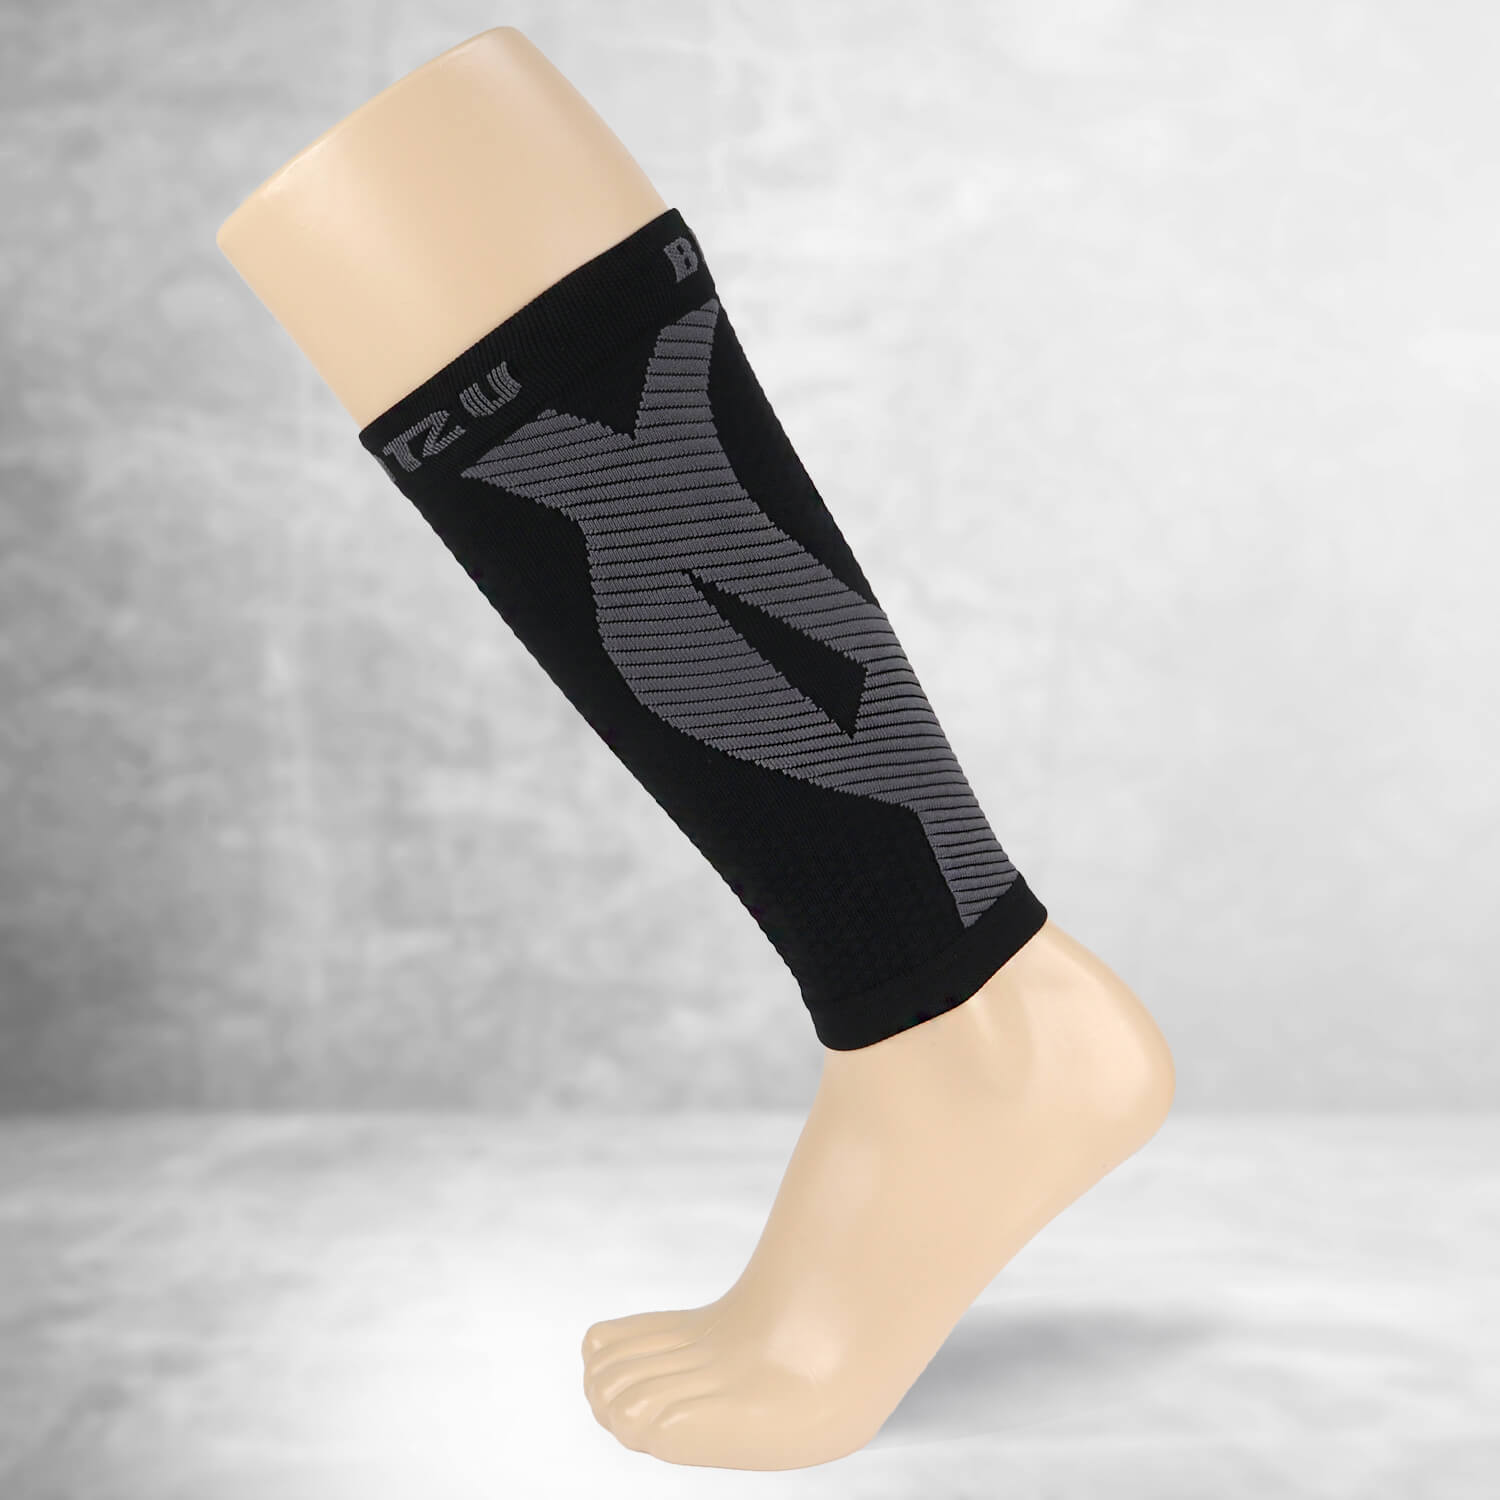 Calf Compression Sleeves, Relief Calf Pain, Calf Support Leg Compatible  With Recovery, Varicose Veins, Shin Splint, Running, Cycling, Sports Men  Women